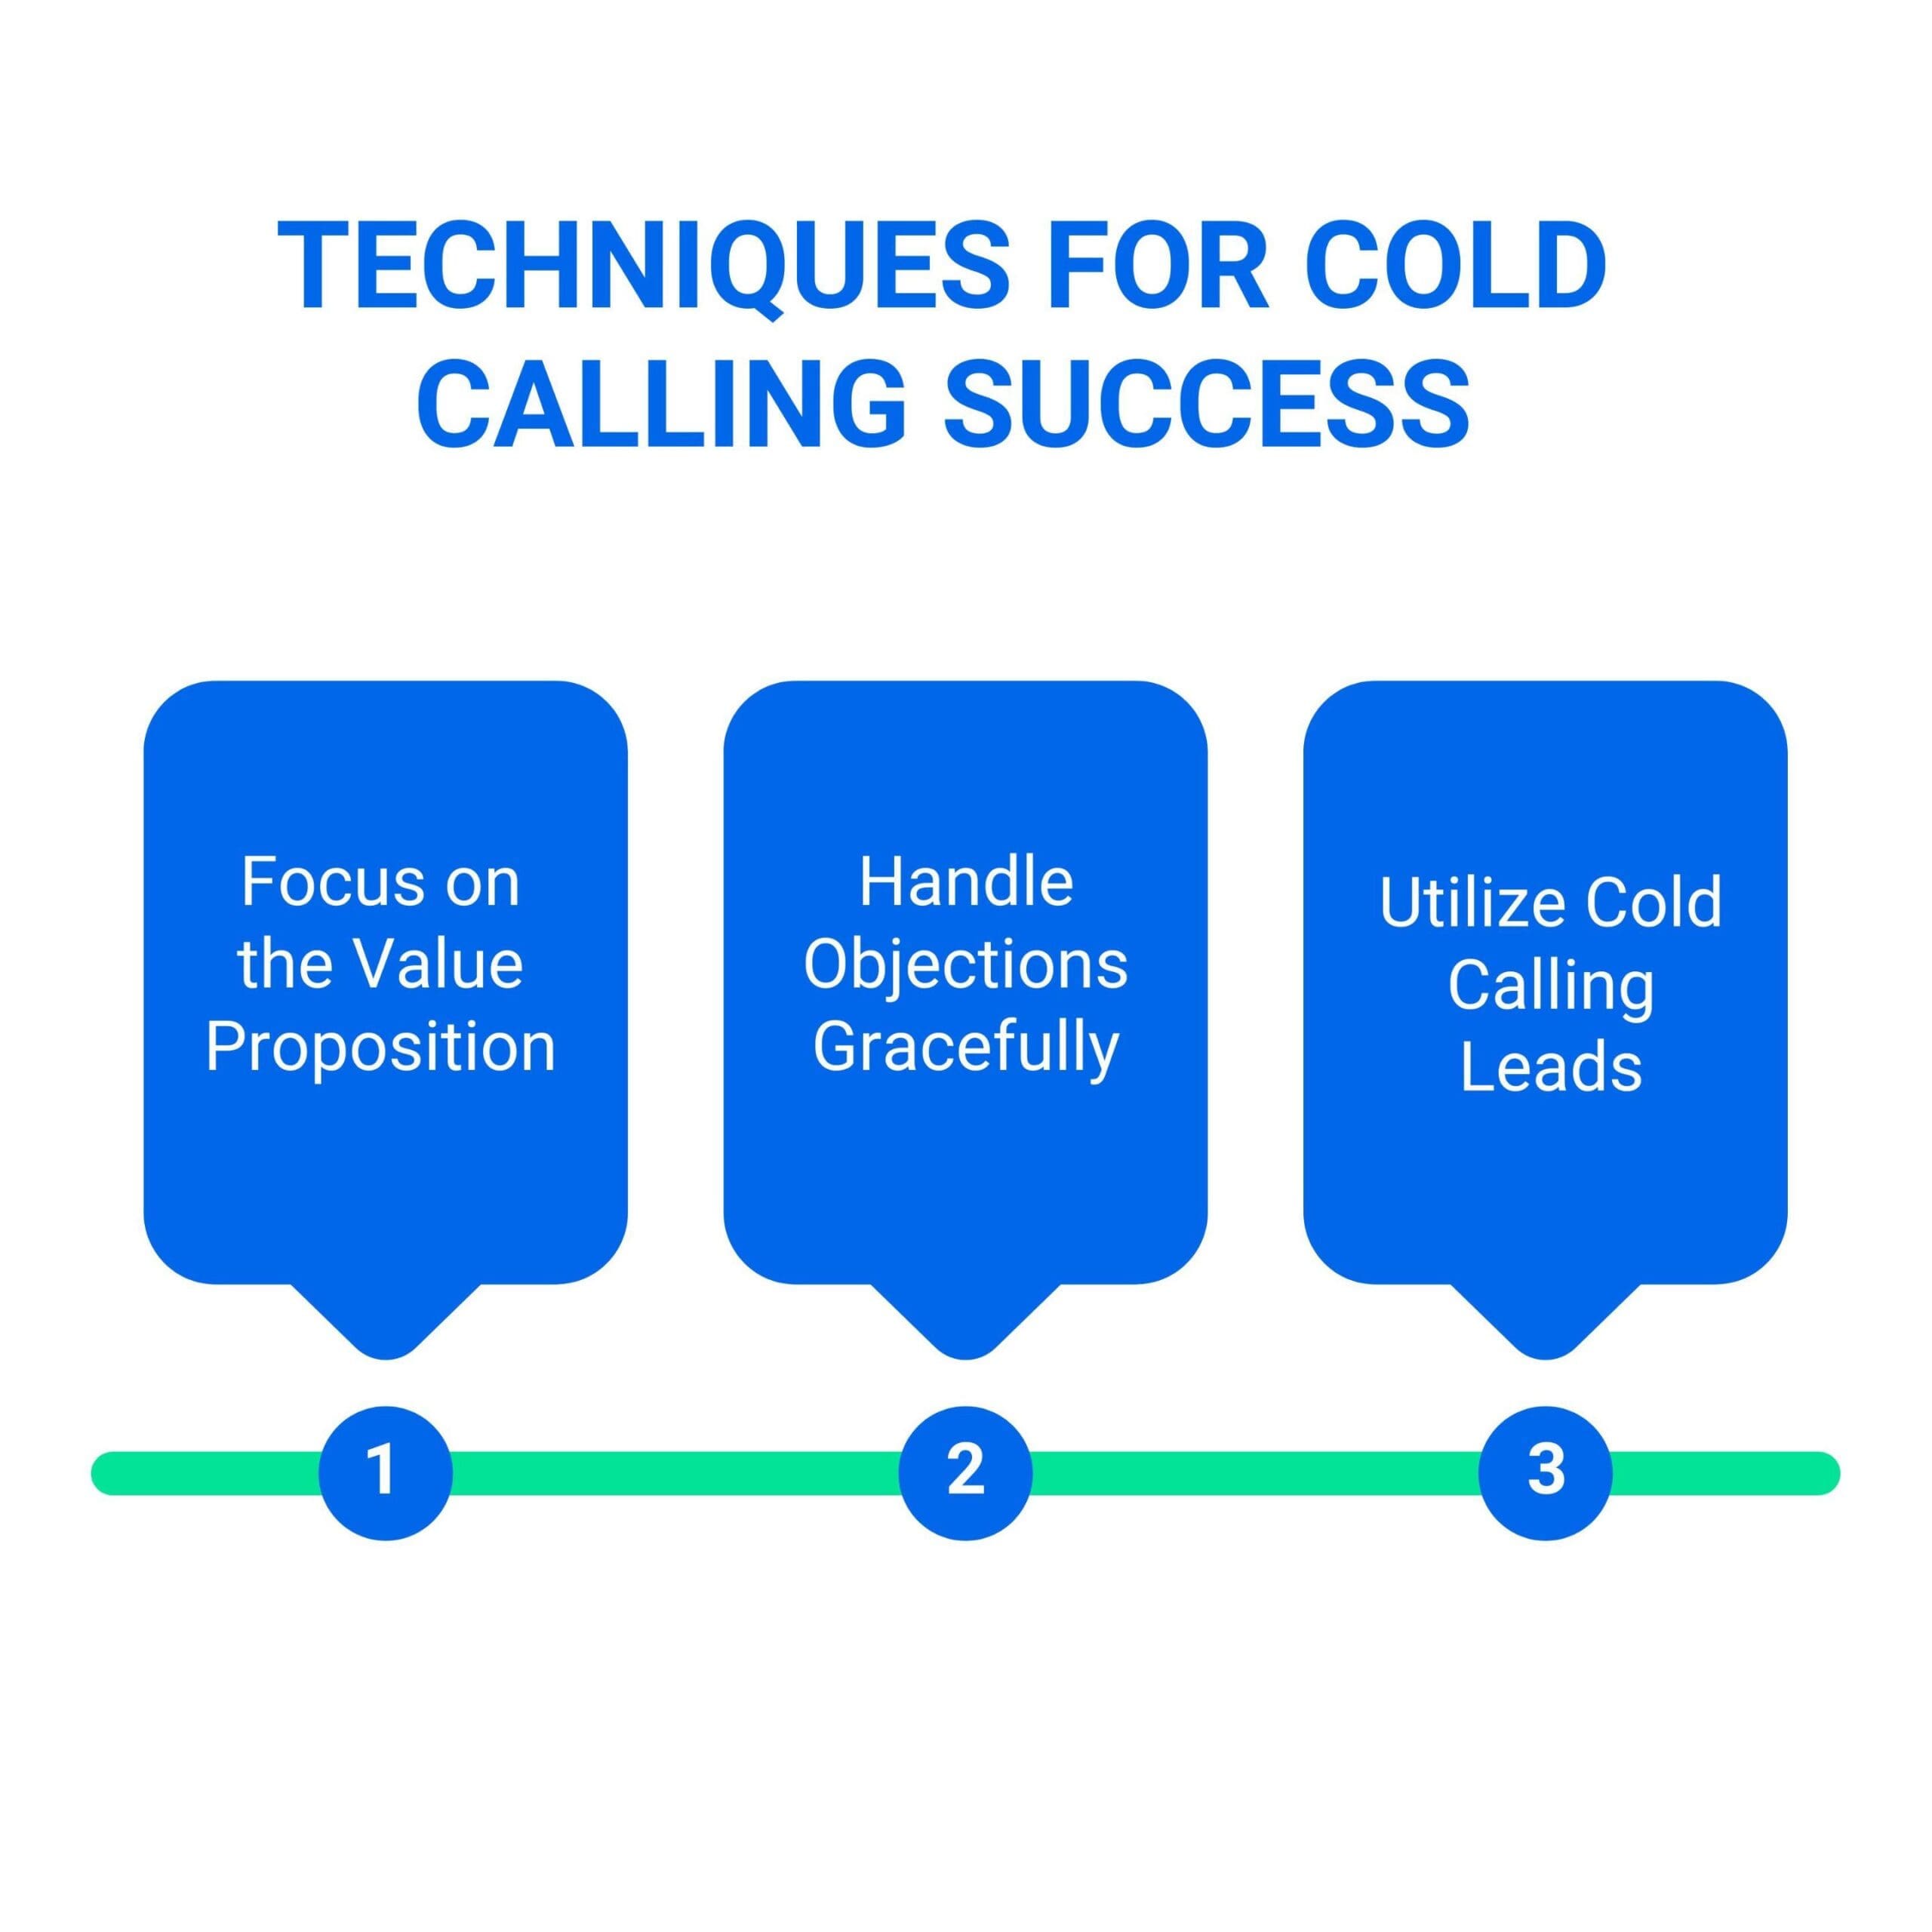 Techniques for cold calling